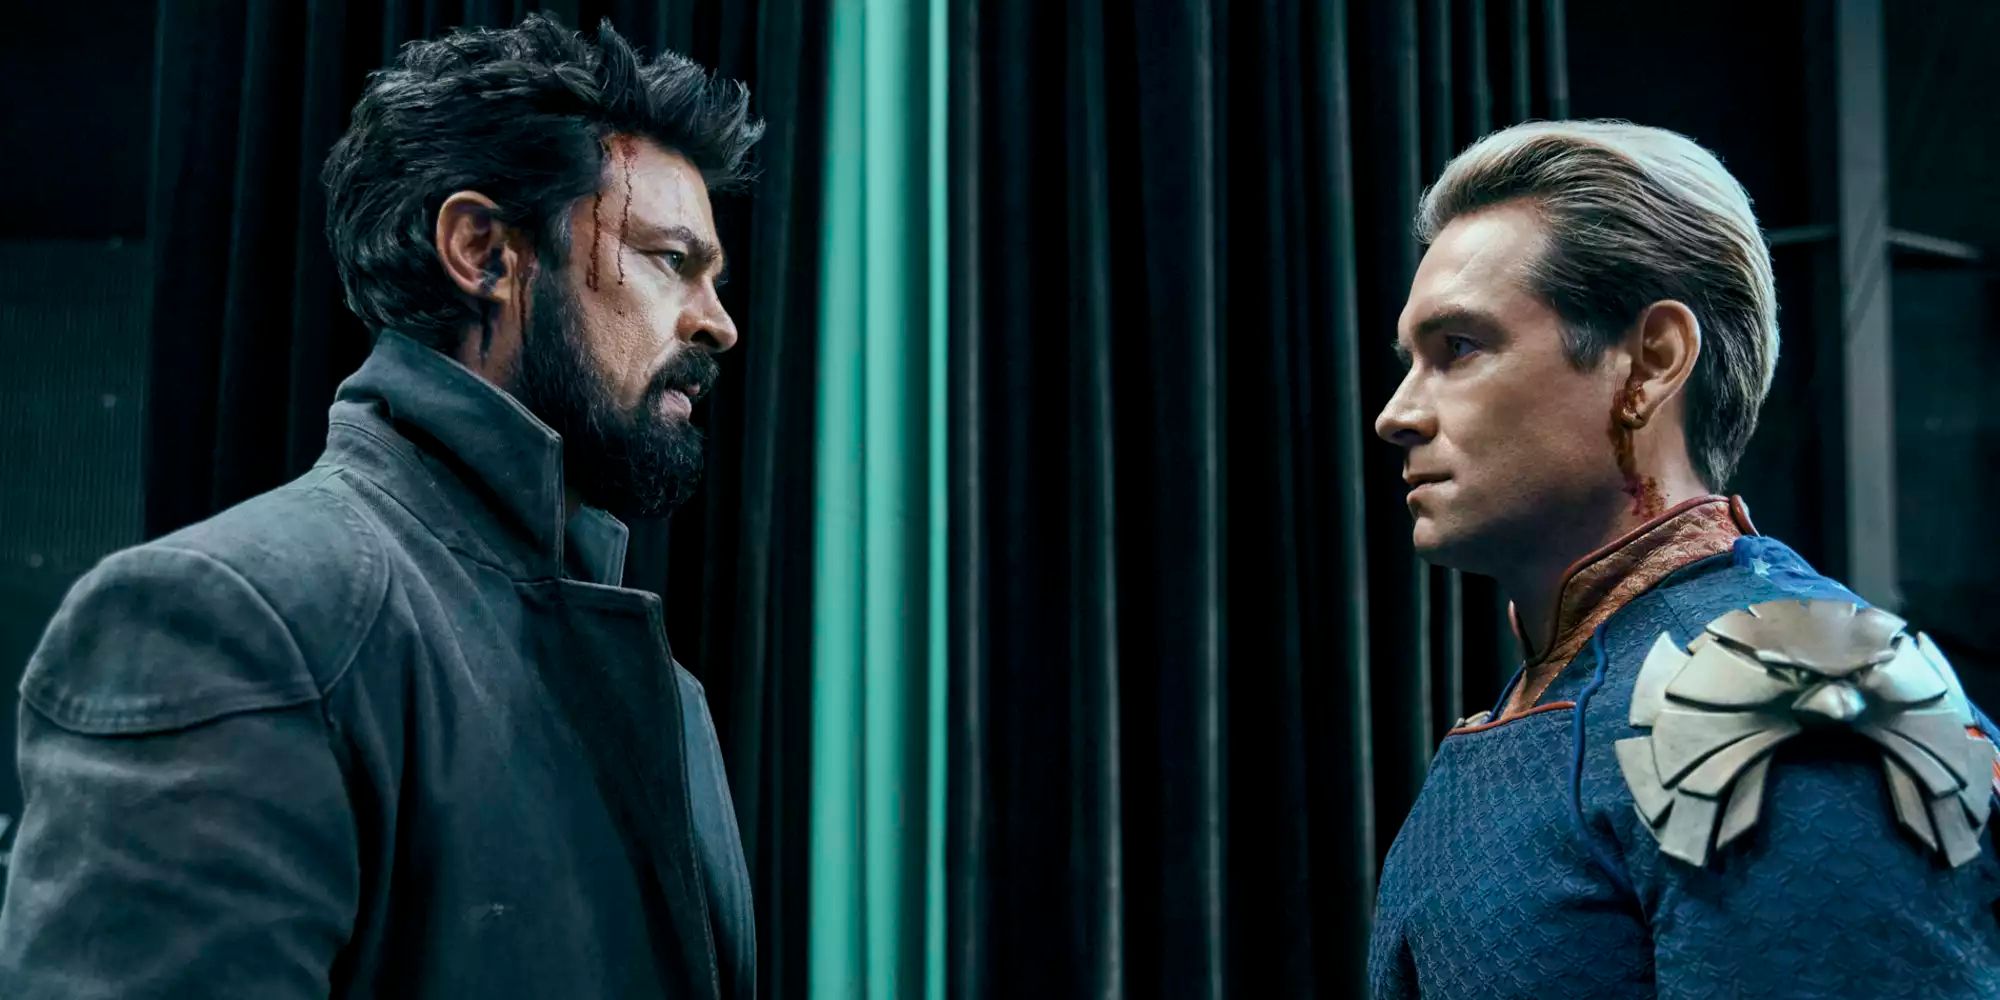 Karl Urban as Butcher and Anthony Starr as Homelander face off in The Boys